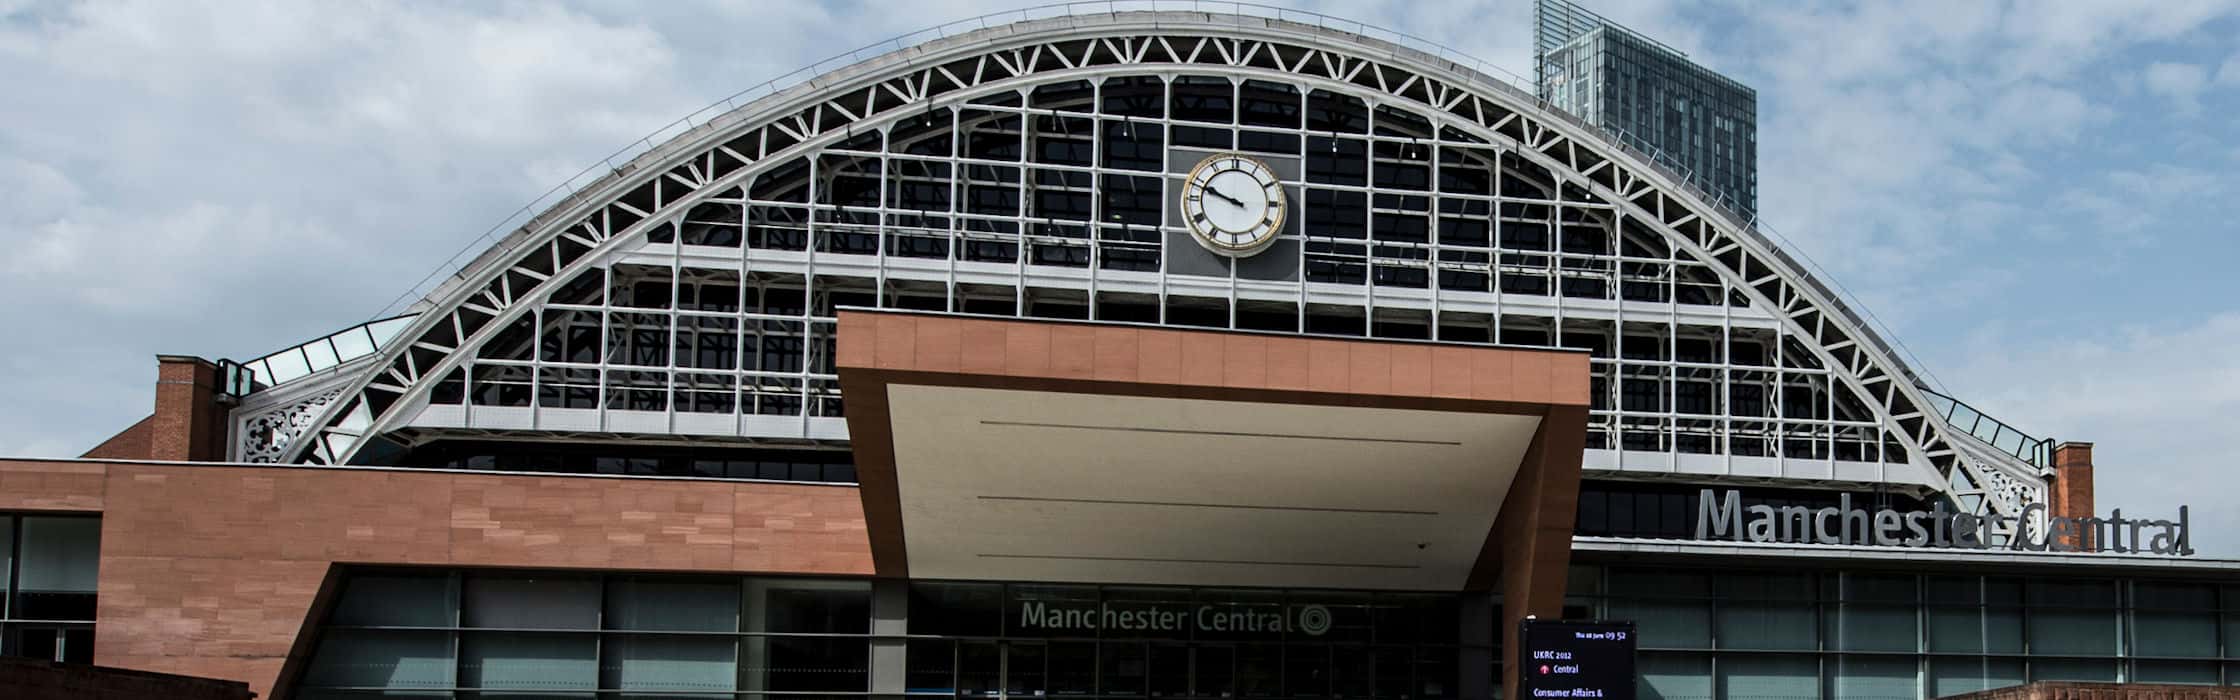 What's On at Manchester Central, Manchester